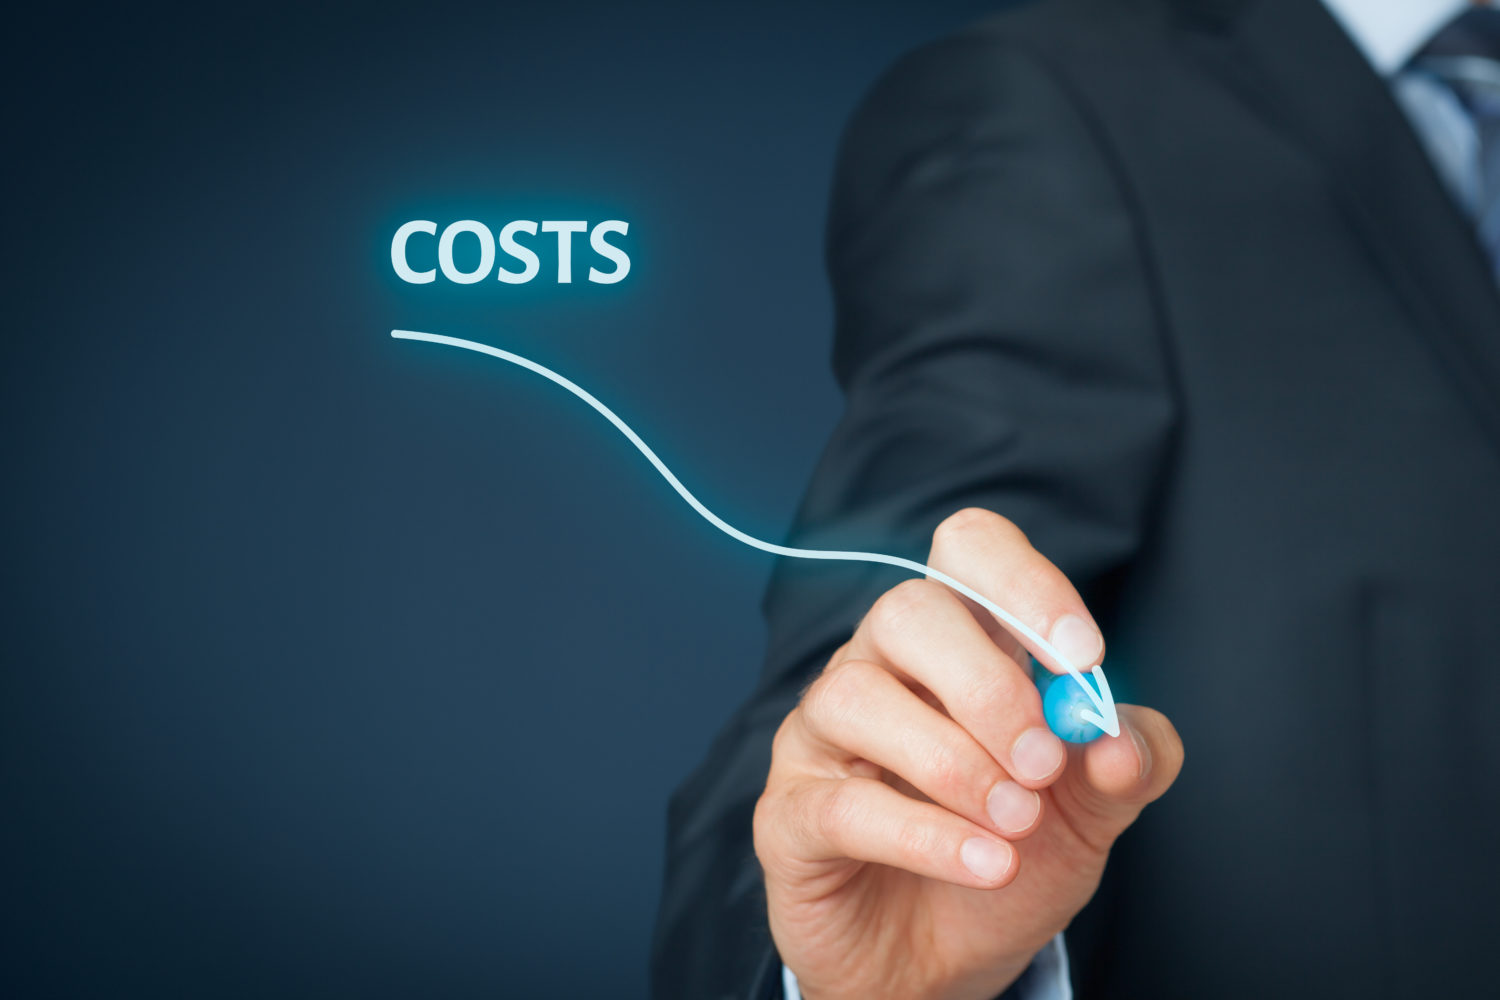 How do CFOs approach cost-cutting while ensuring efficiency and productivity